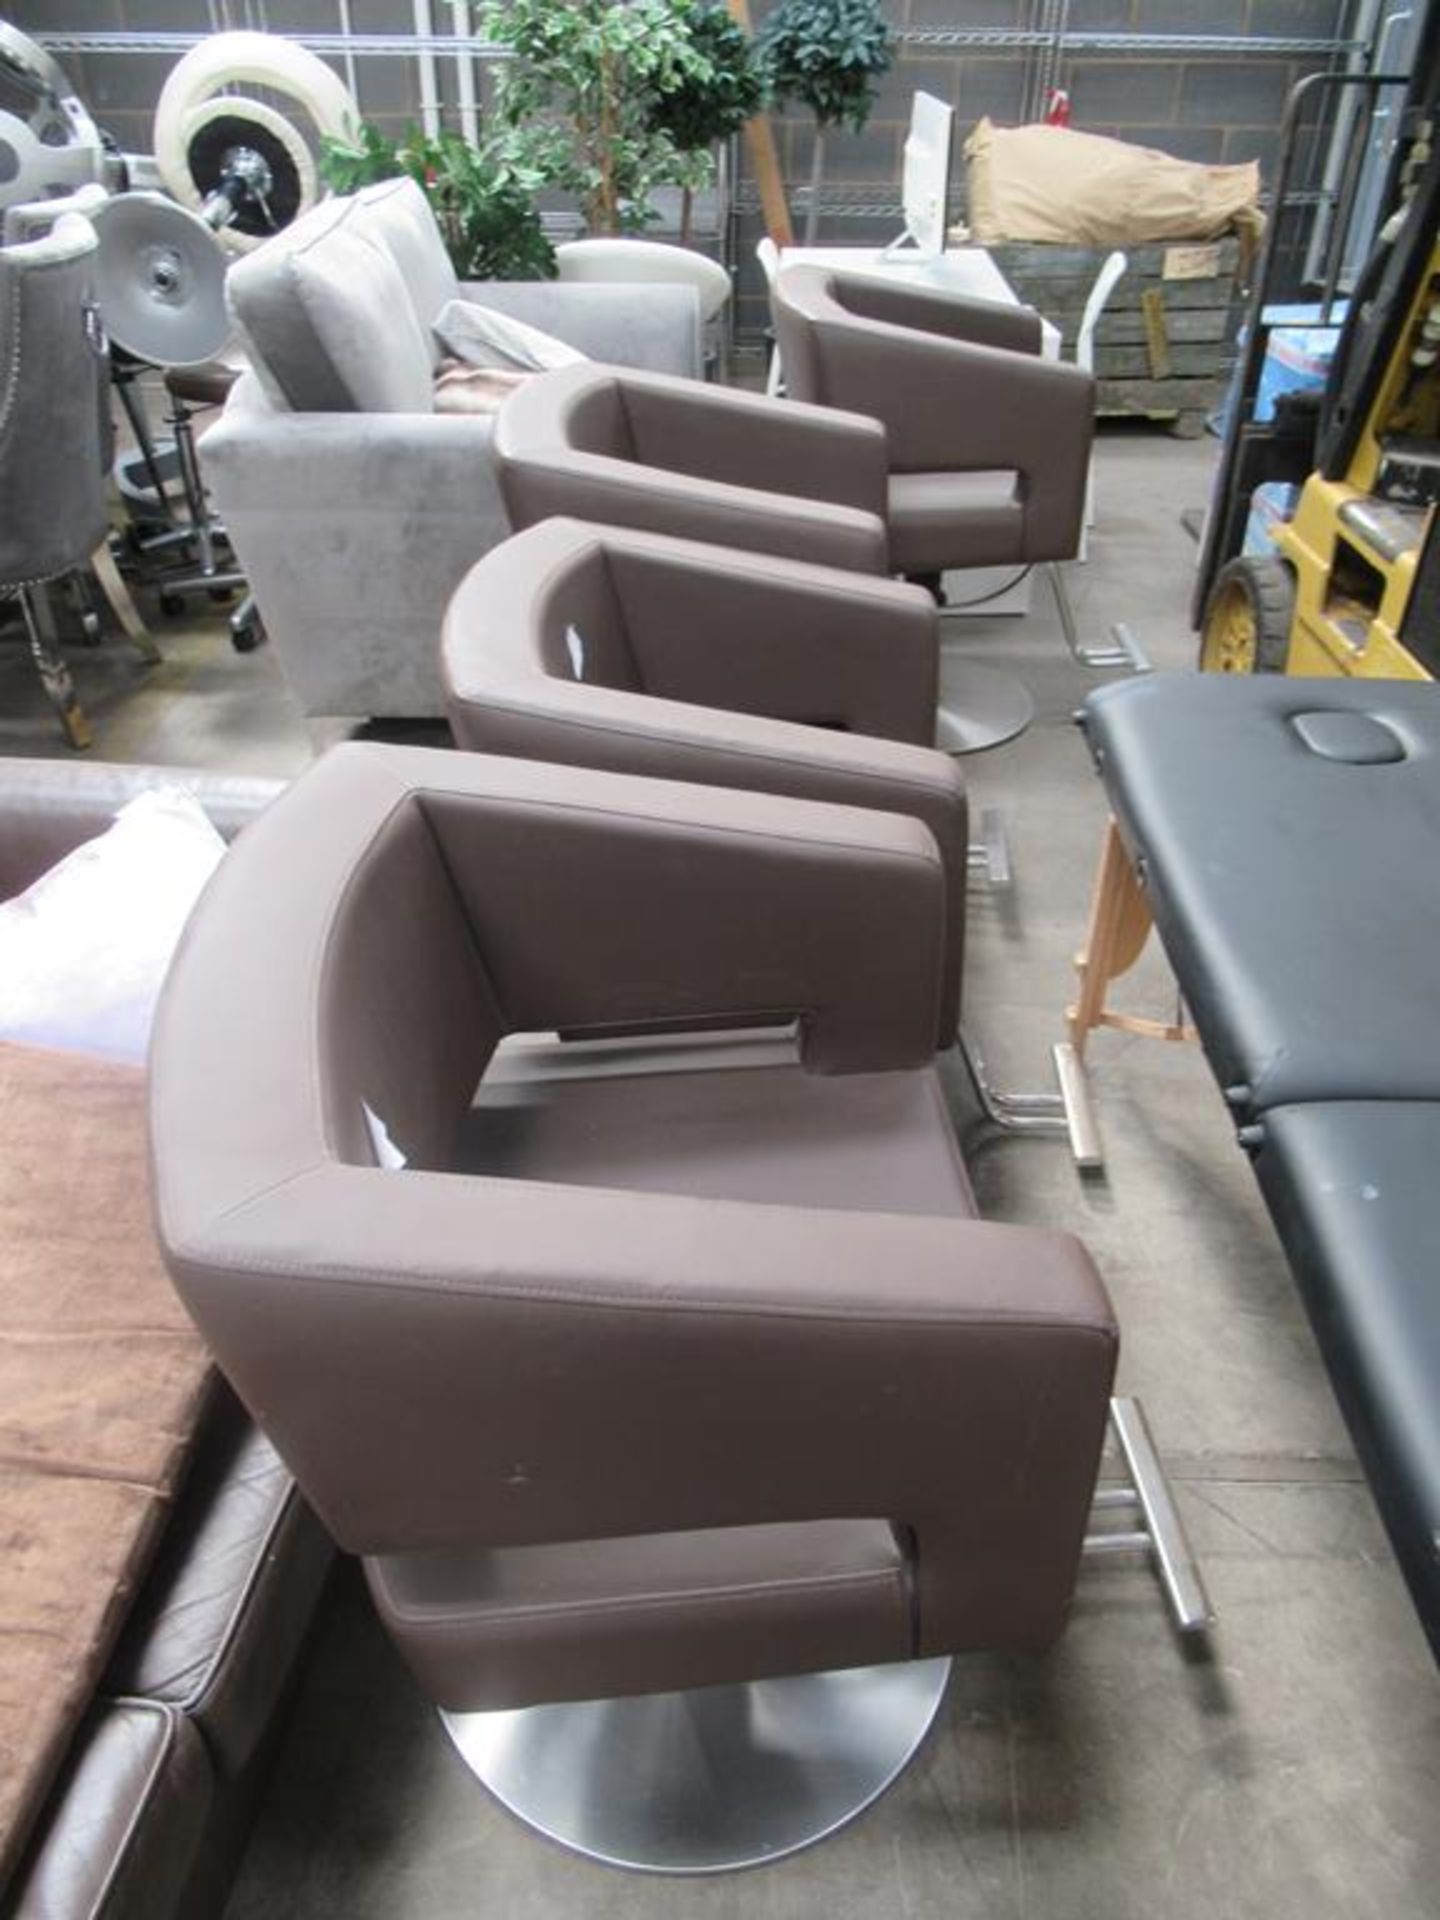 6 x brown leather effect salon chairs - Image 2 of 3